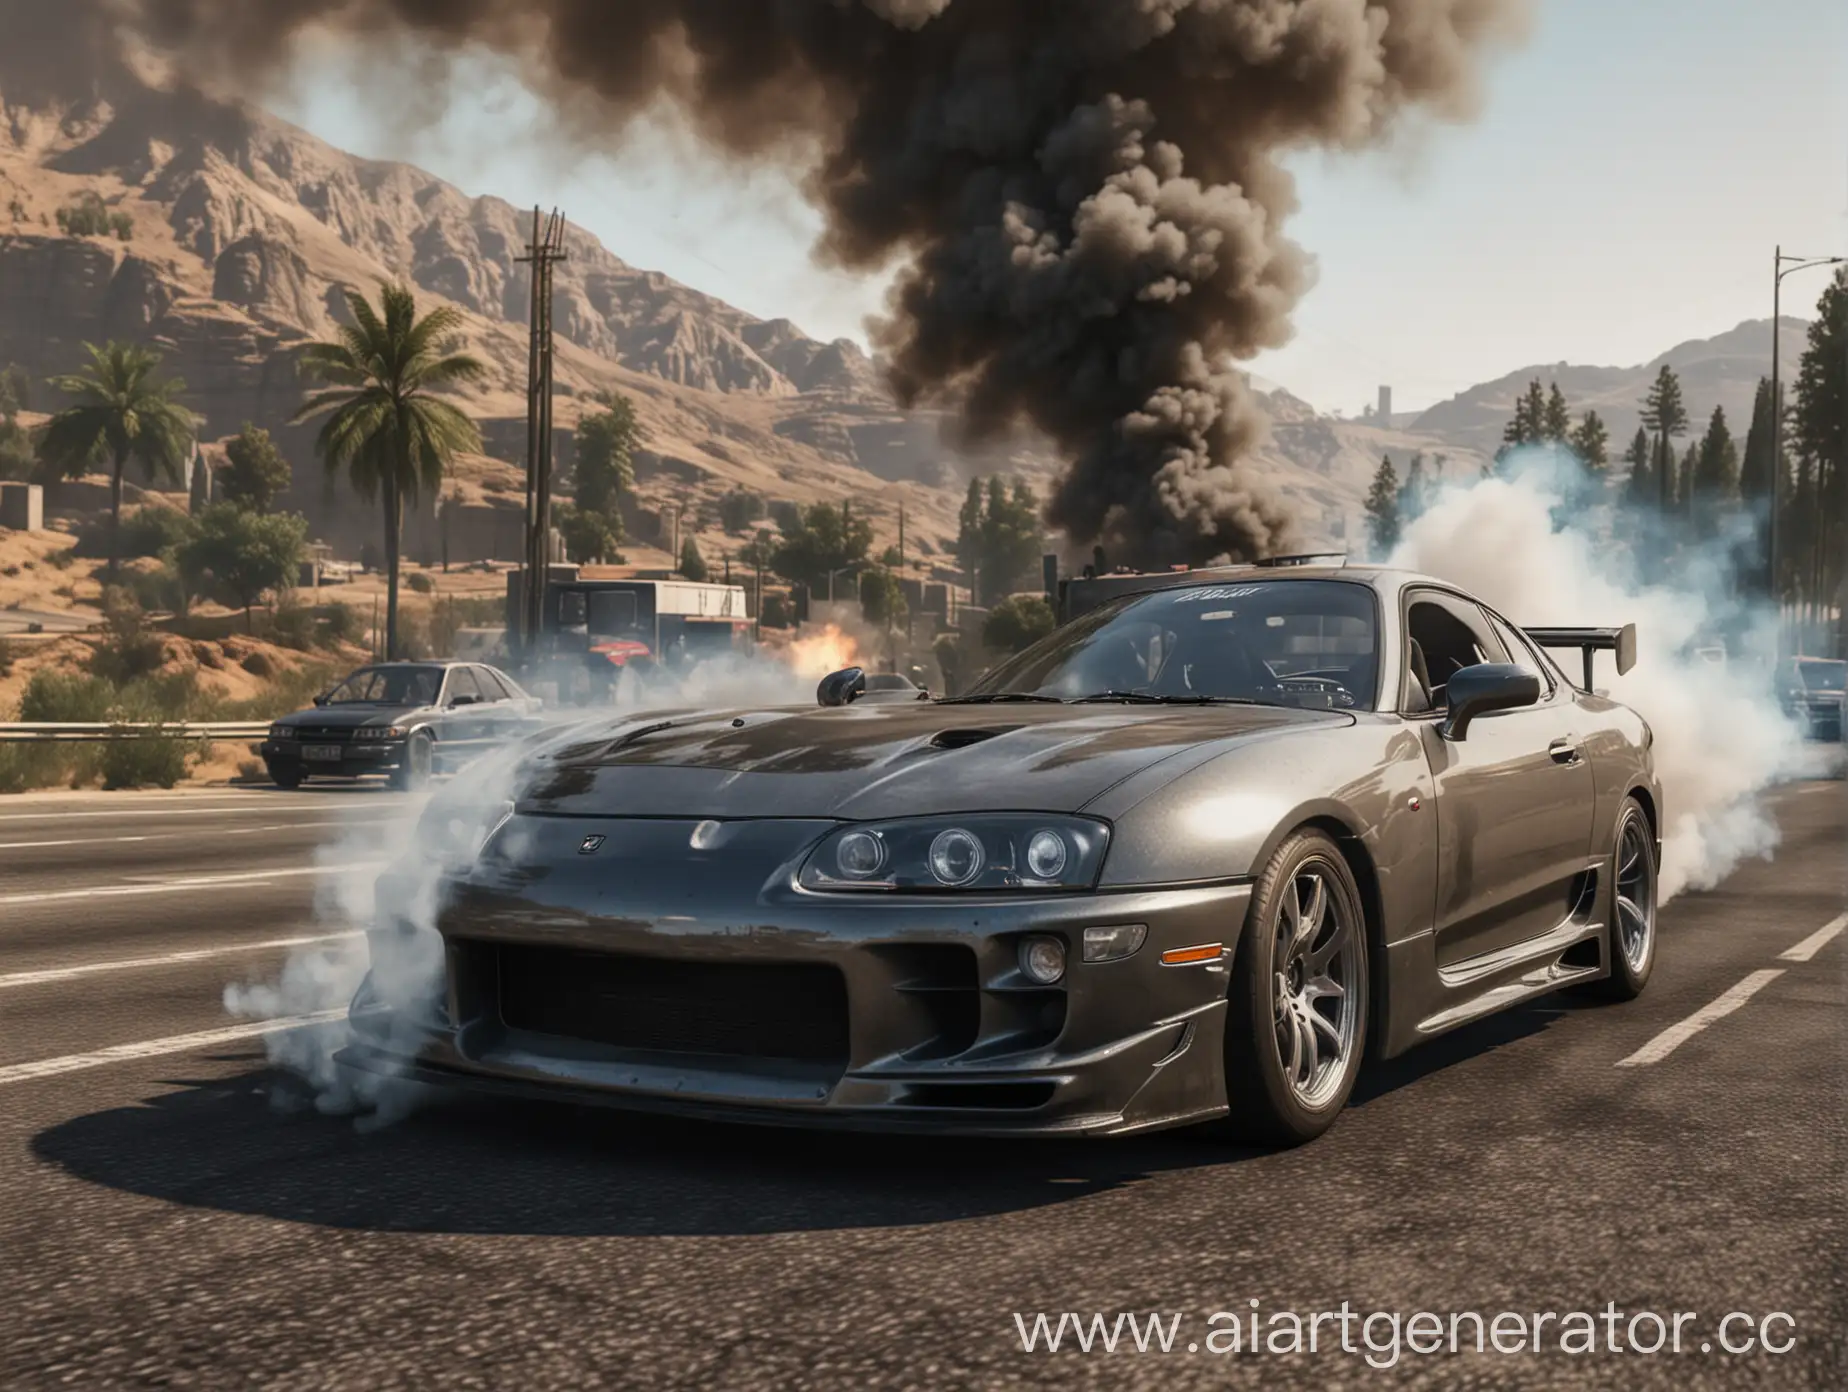 HighSpeed-Adventure-Driving-a-Supra-4th-Generation-Car-with-Tire-Smoke